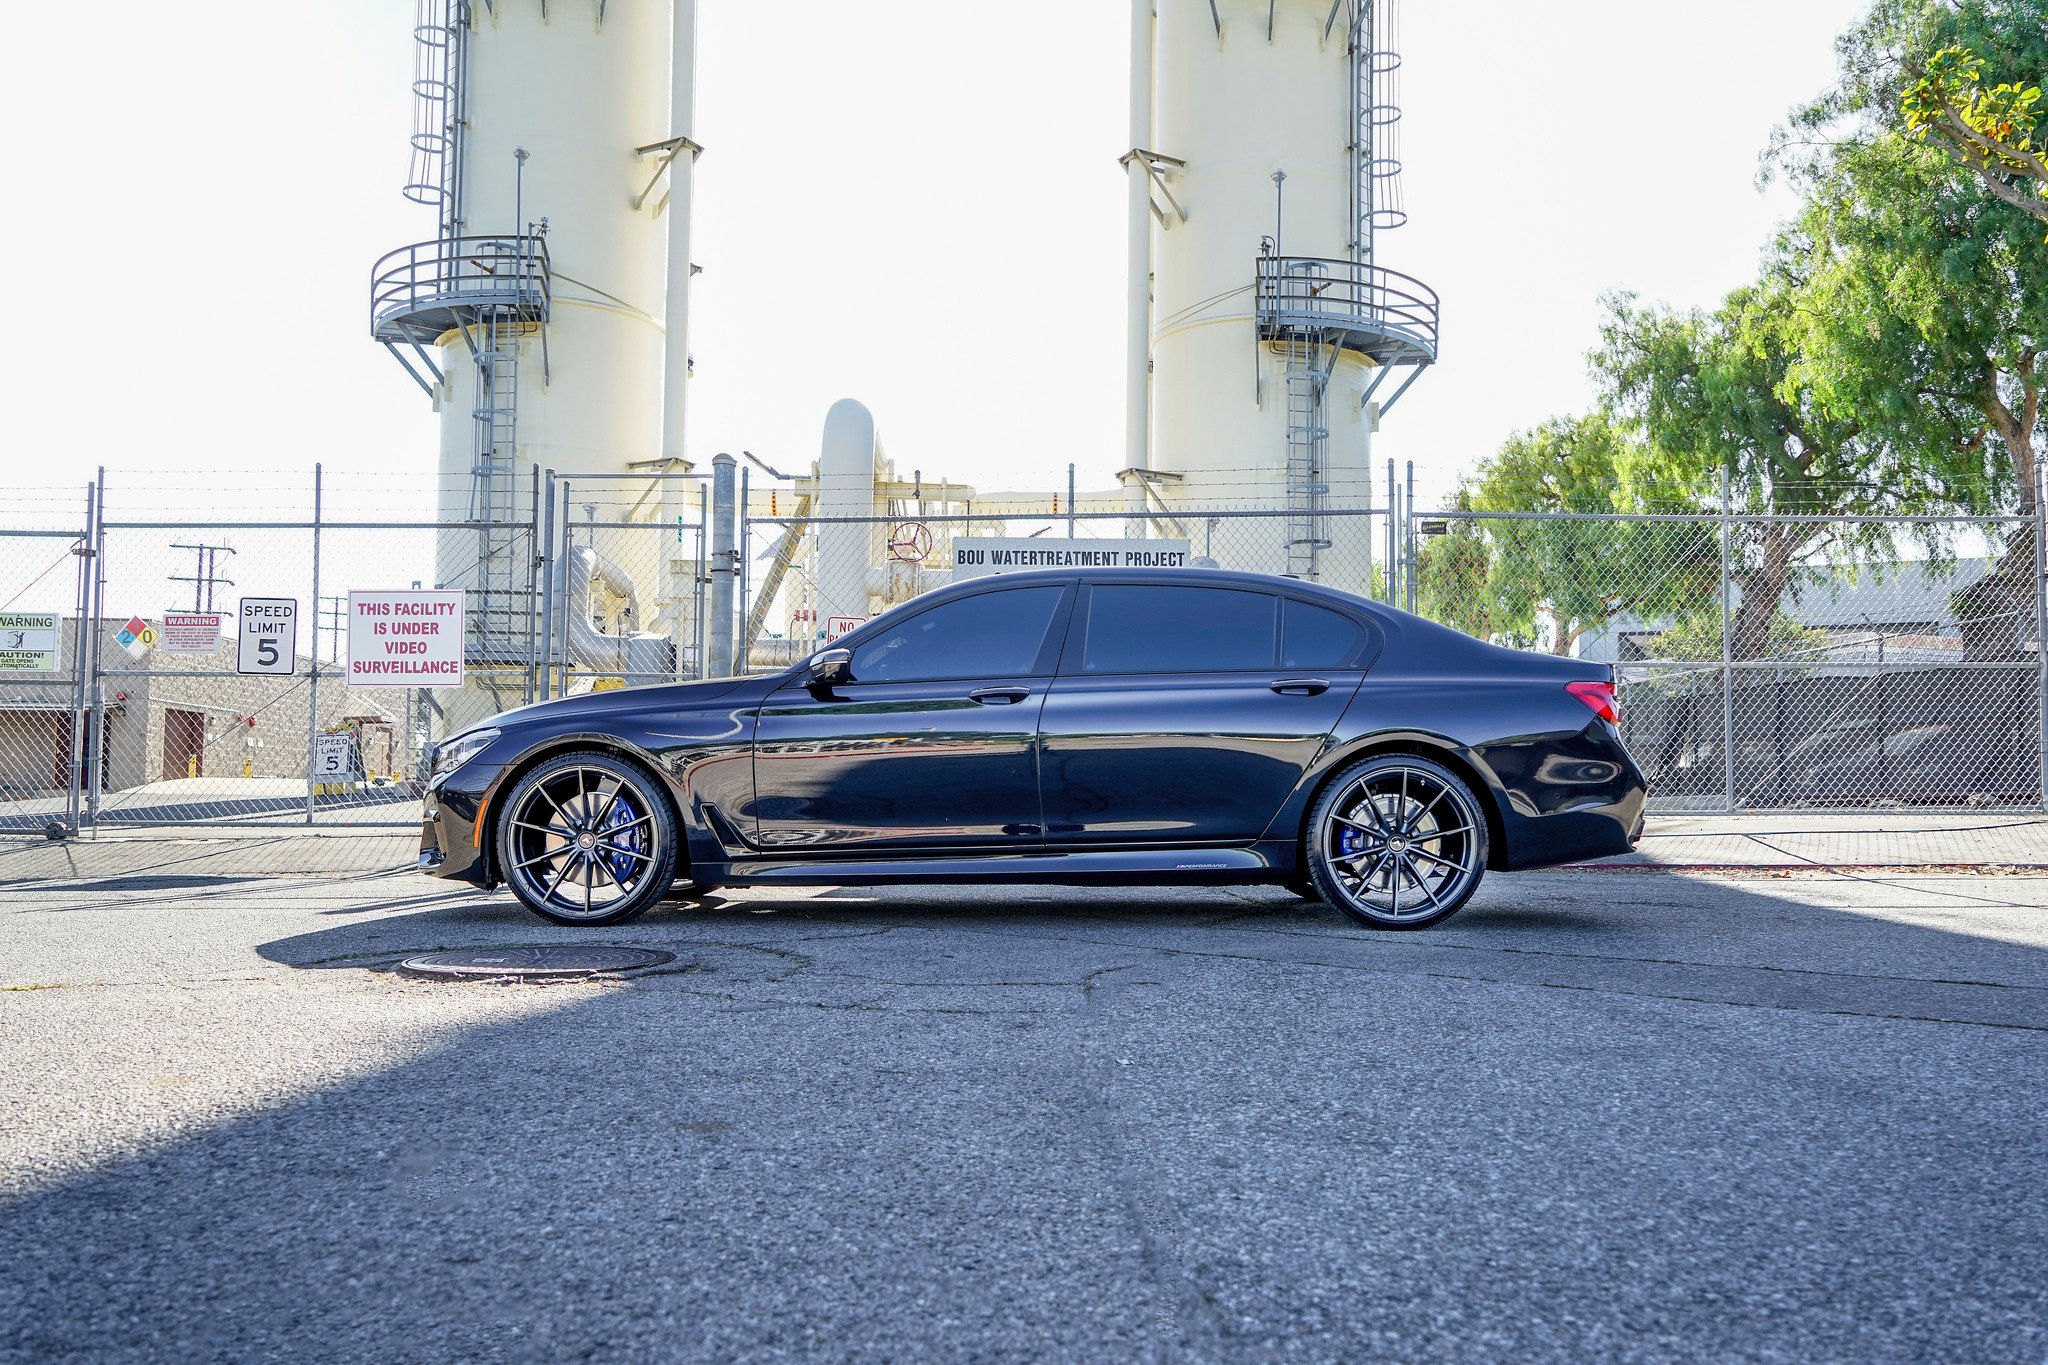 Aftermarket Side Skirts on Black BMW 7-Series - Photo by VIBE Motorsports